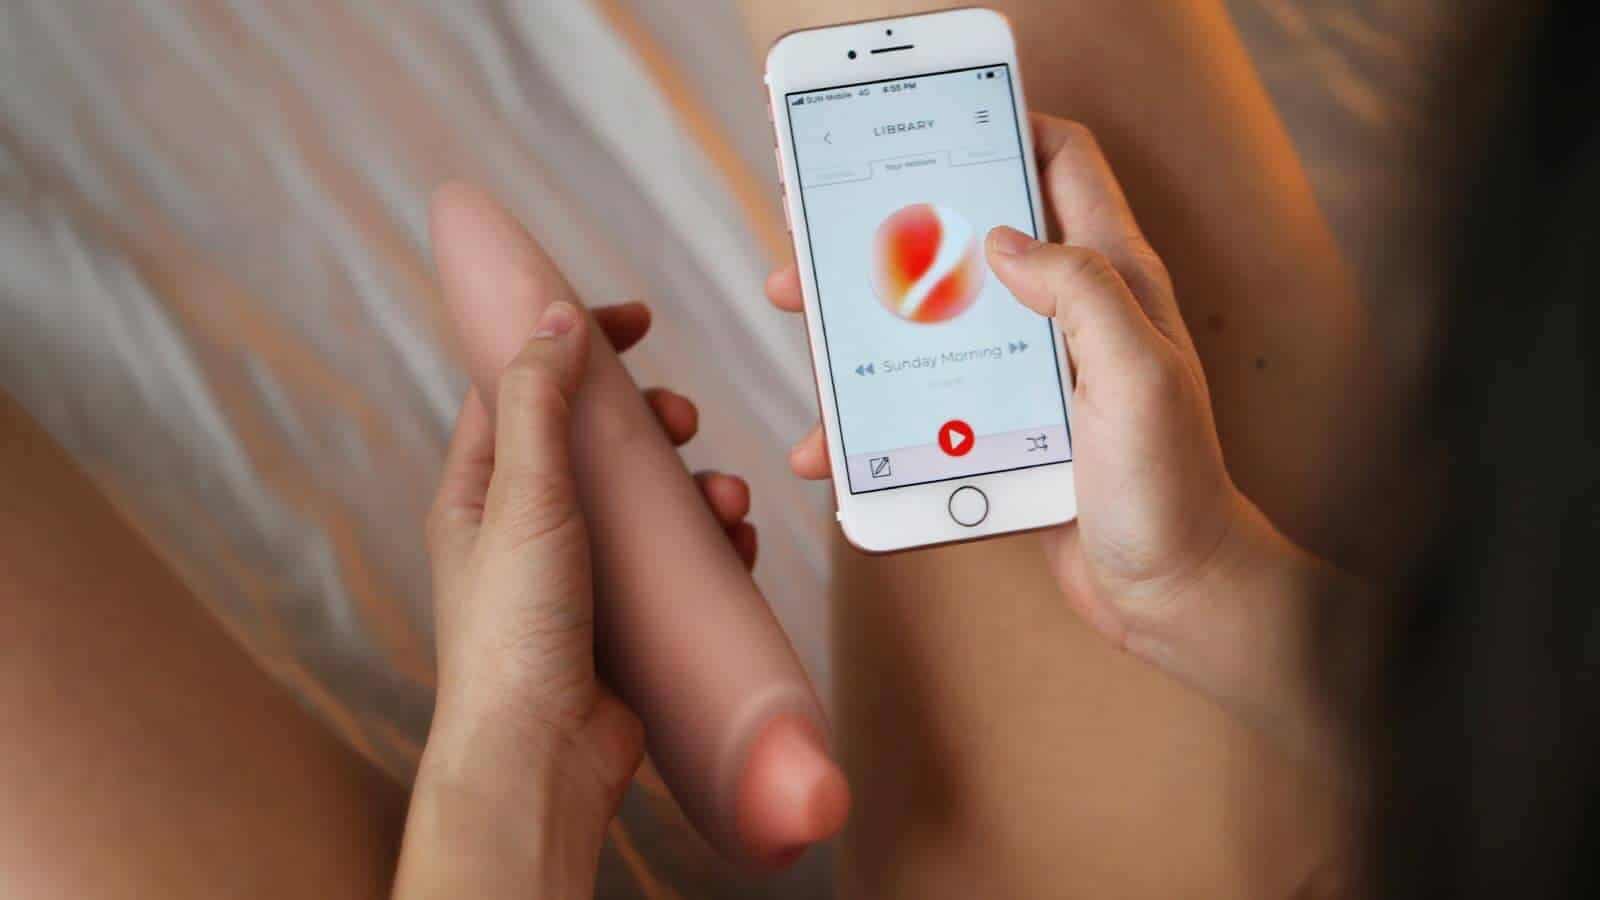 A woman using a cell phone to play with a smart oral sex toy.